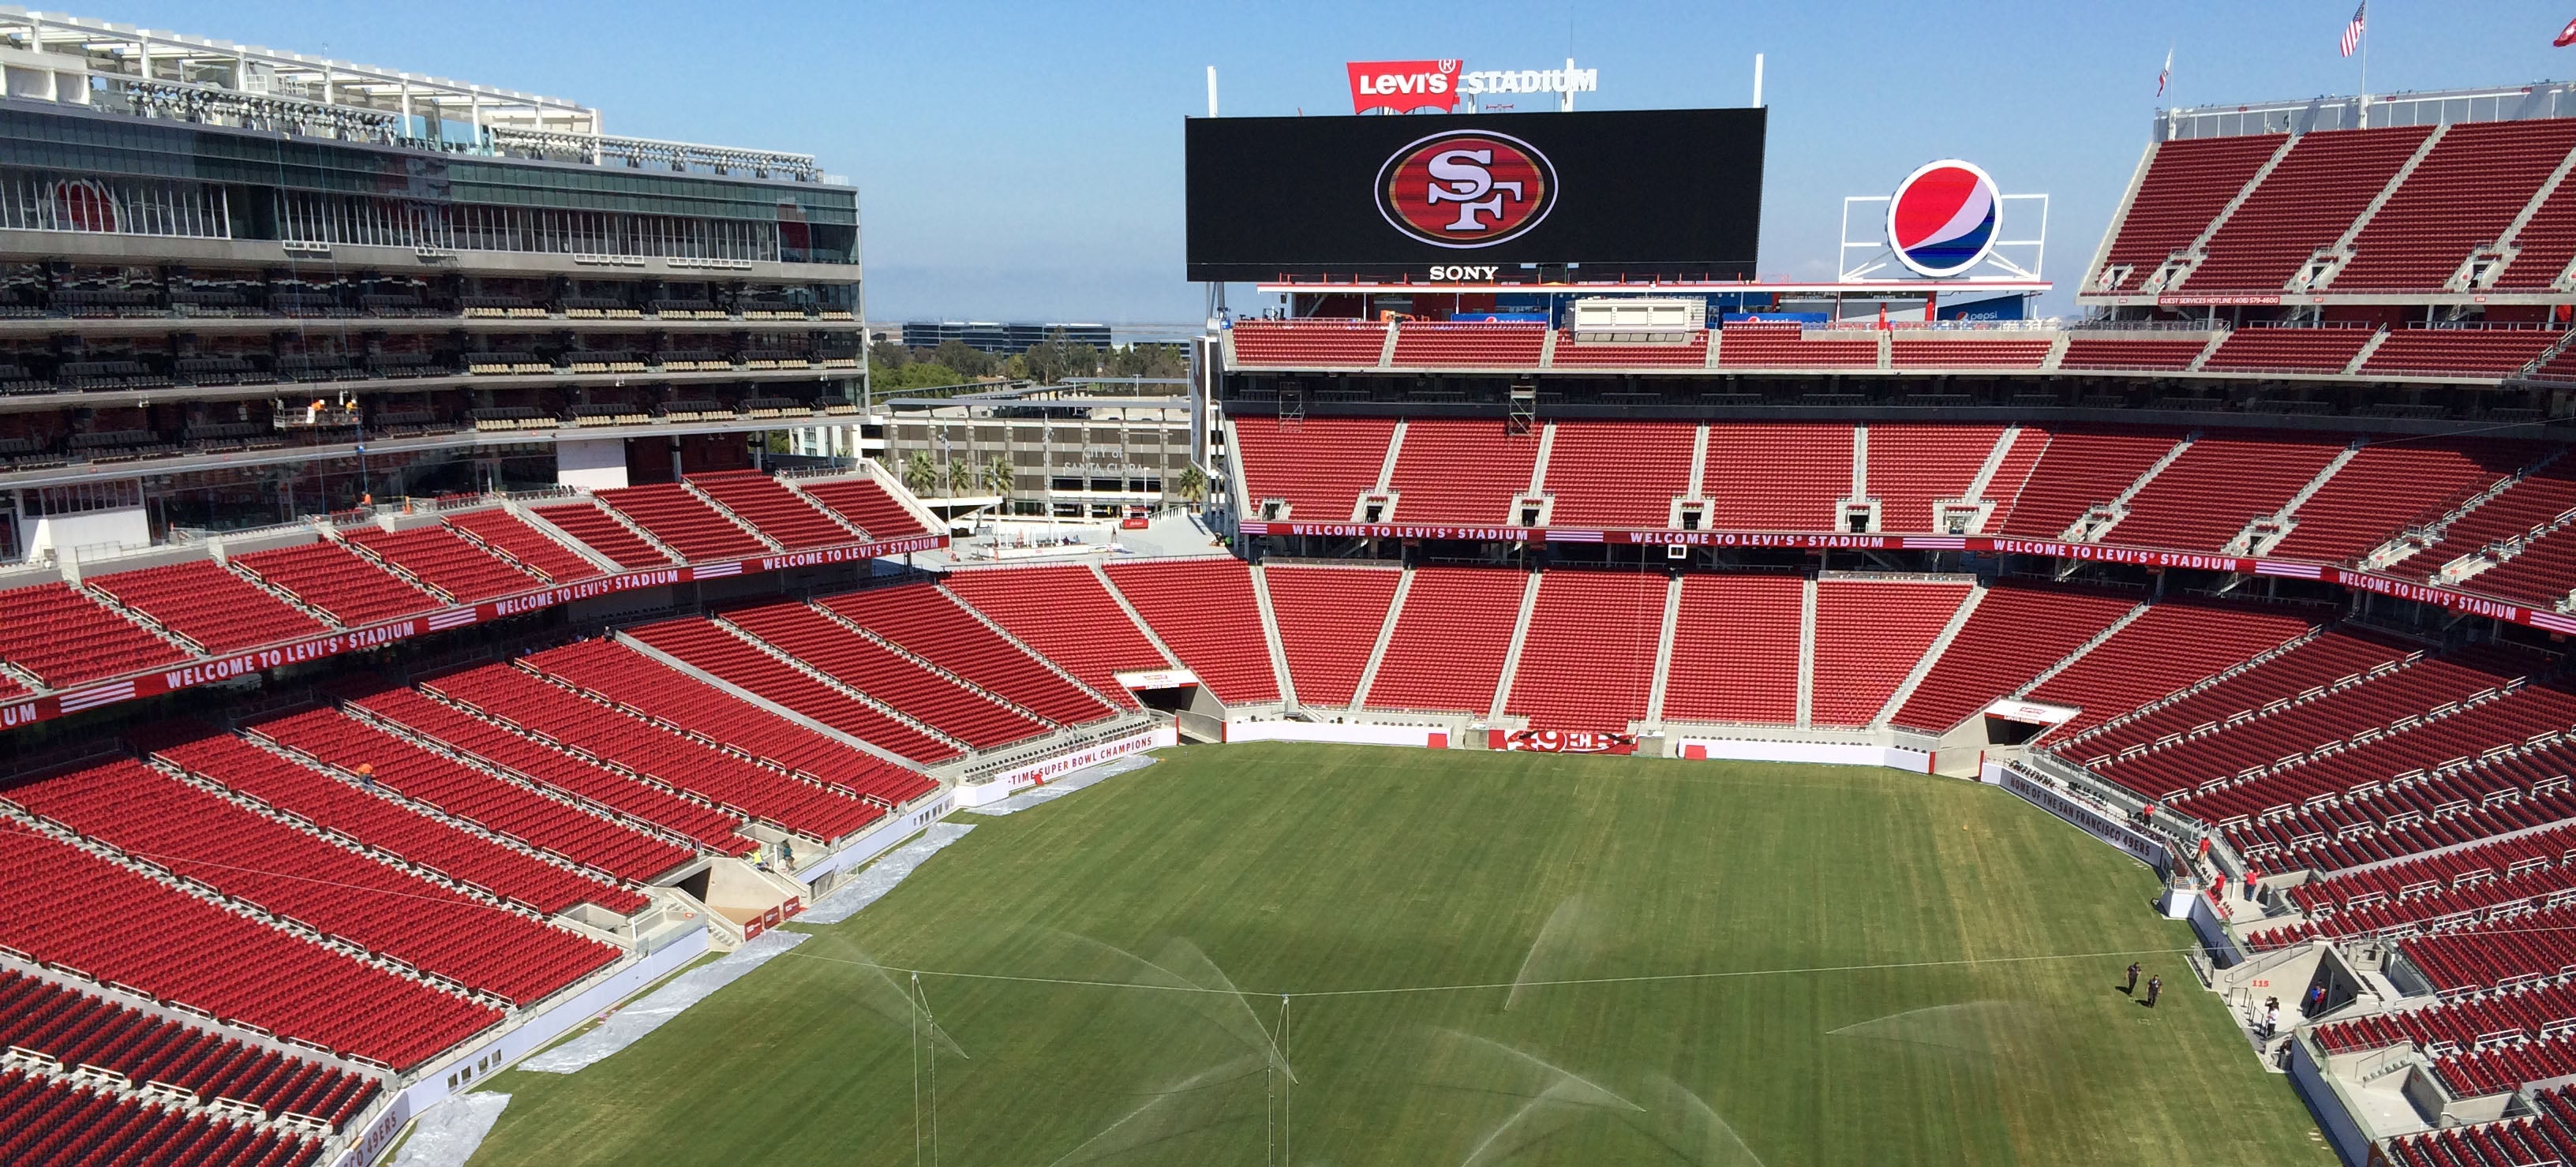 behind-the-scenes-at-the-san-francisco-49ers-new-high-tech-stadium